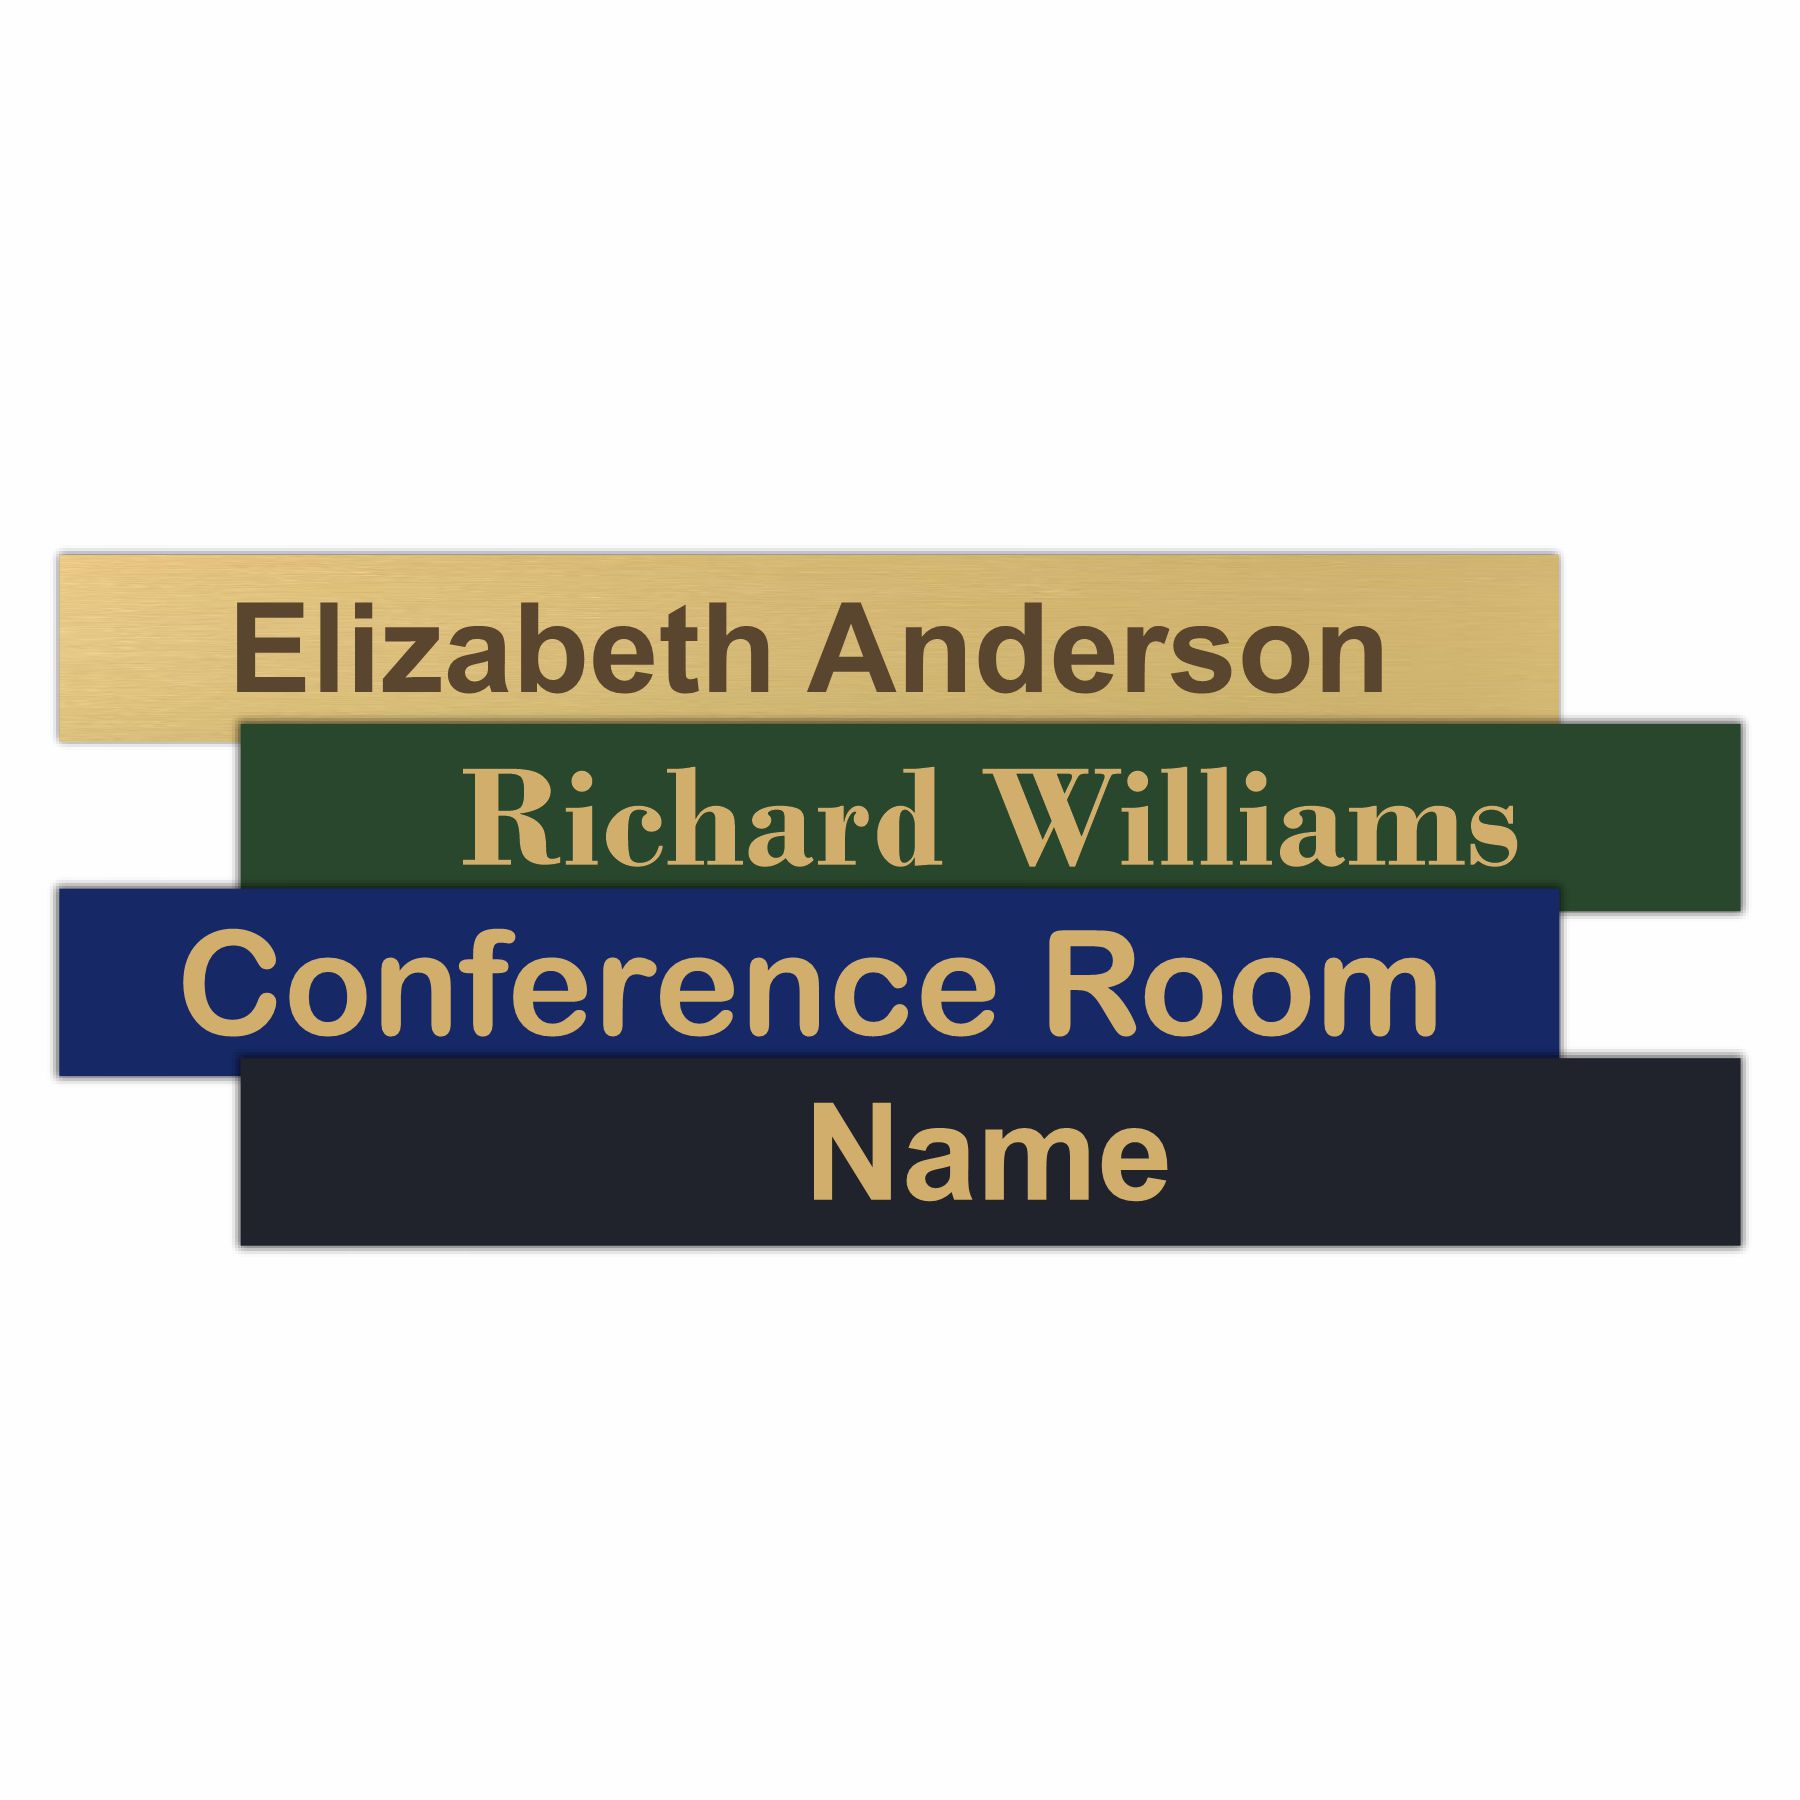 1" x 6" CUSTOM Laser ENGRAVED Plastic NAMEPLATE Personalize Sign Tag Name Plate 